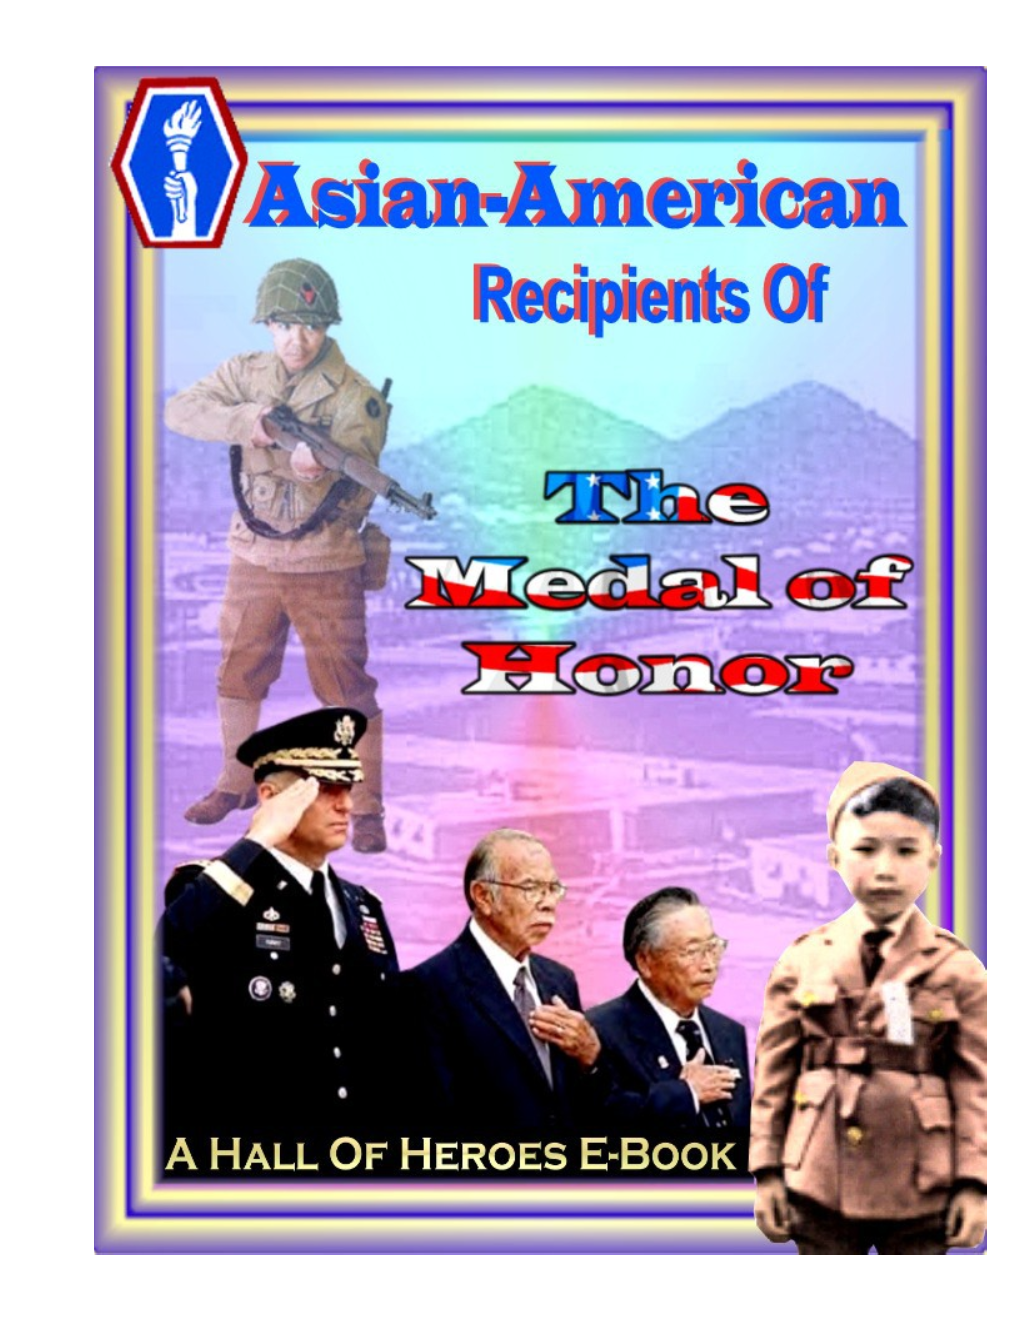 Asian-American Medal of Honor Recipients